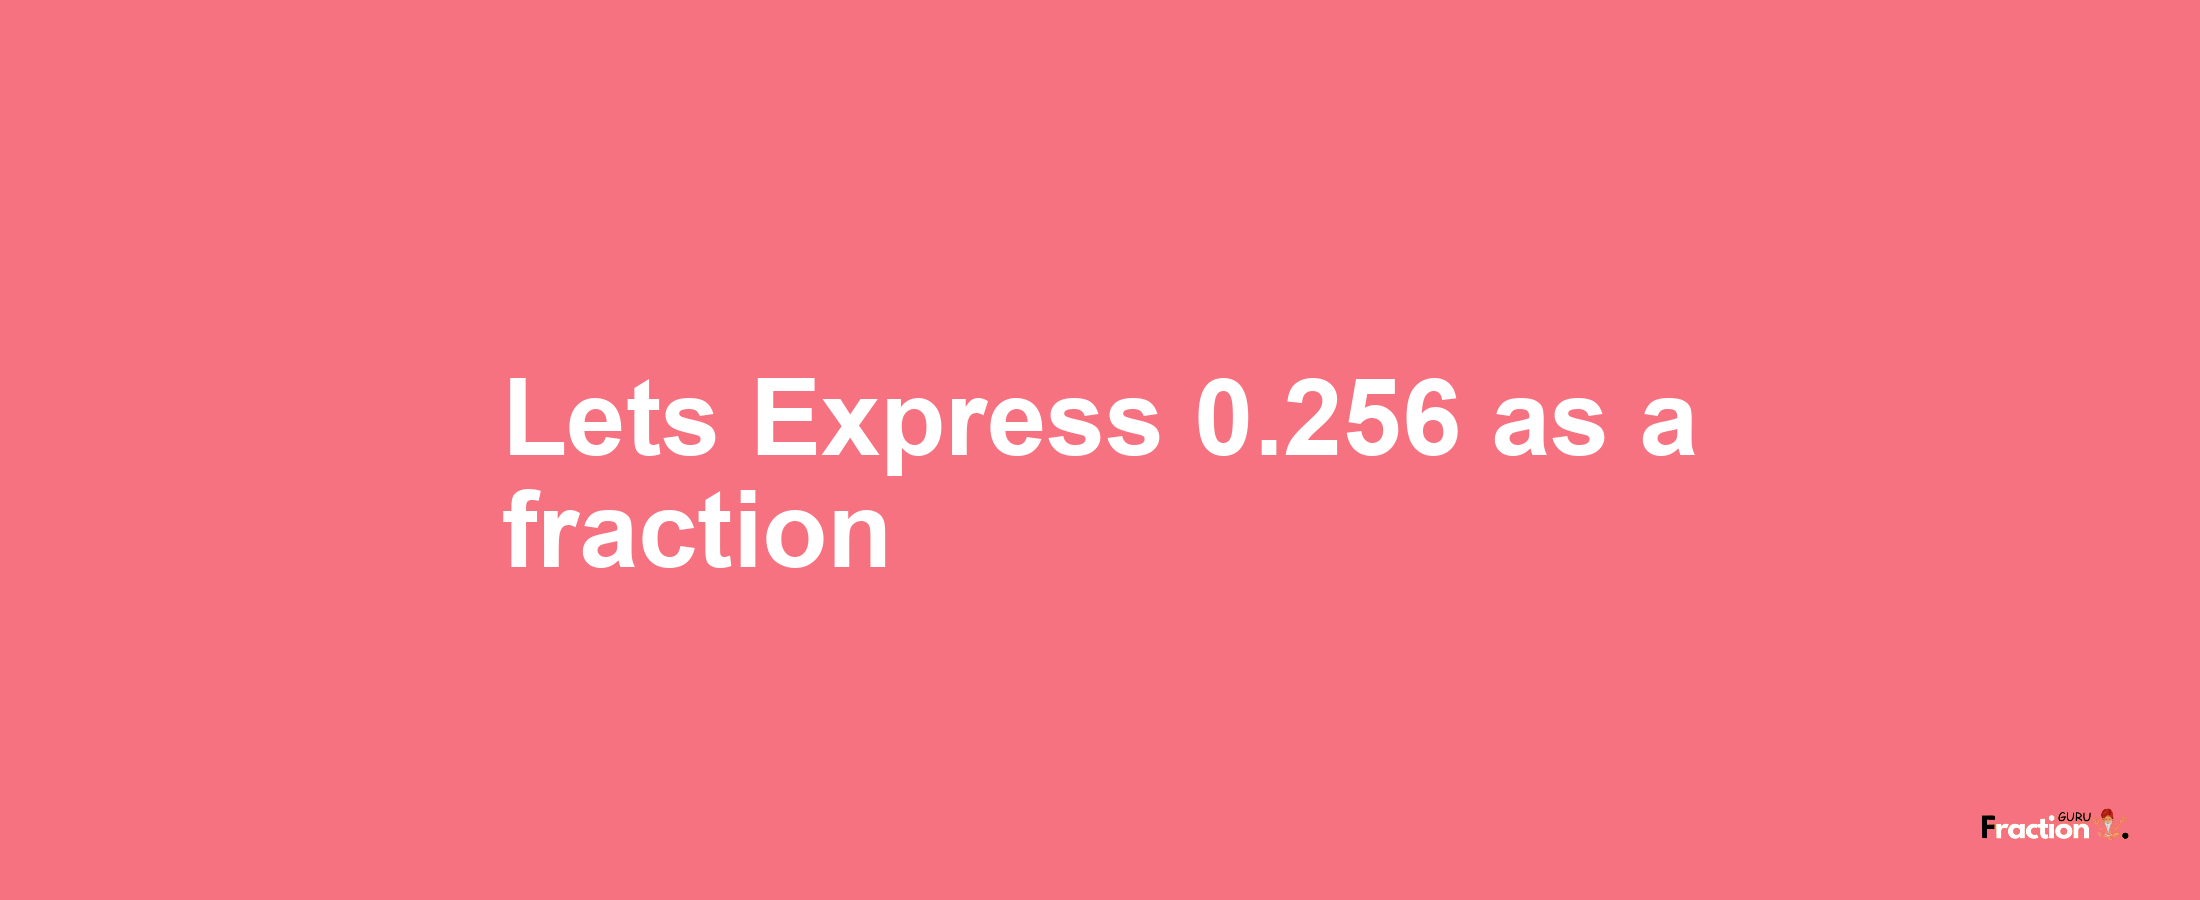 Lets Express 0.256 as afraction